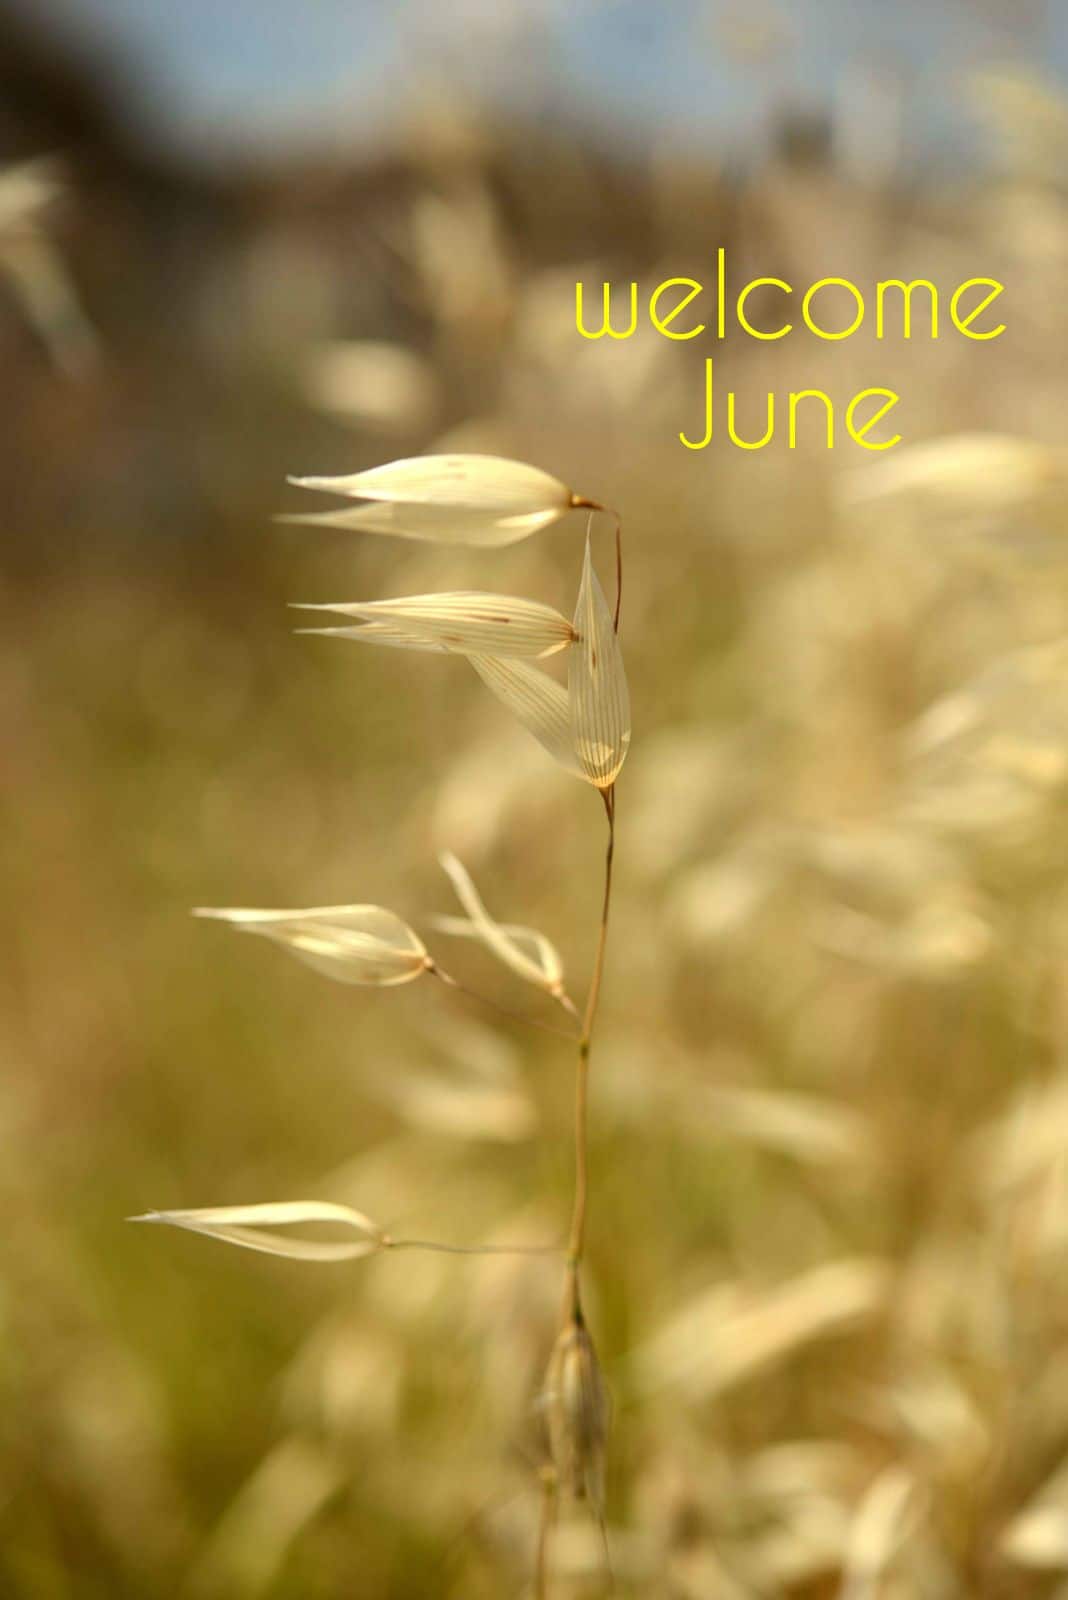  Quotes OF June Month